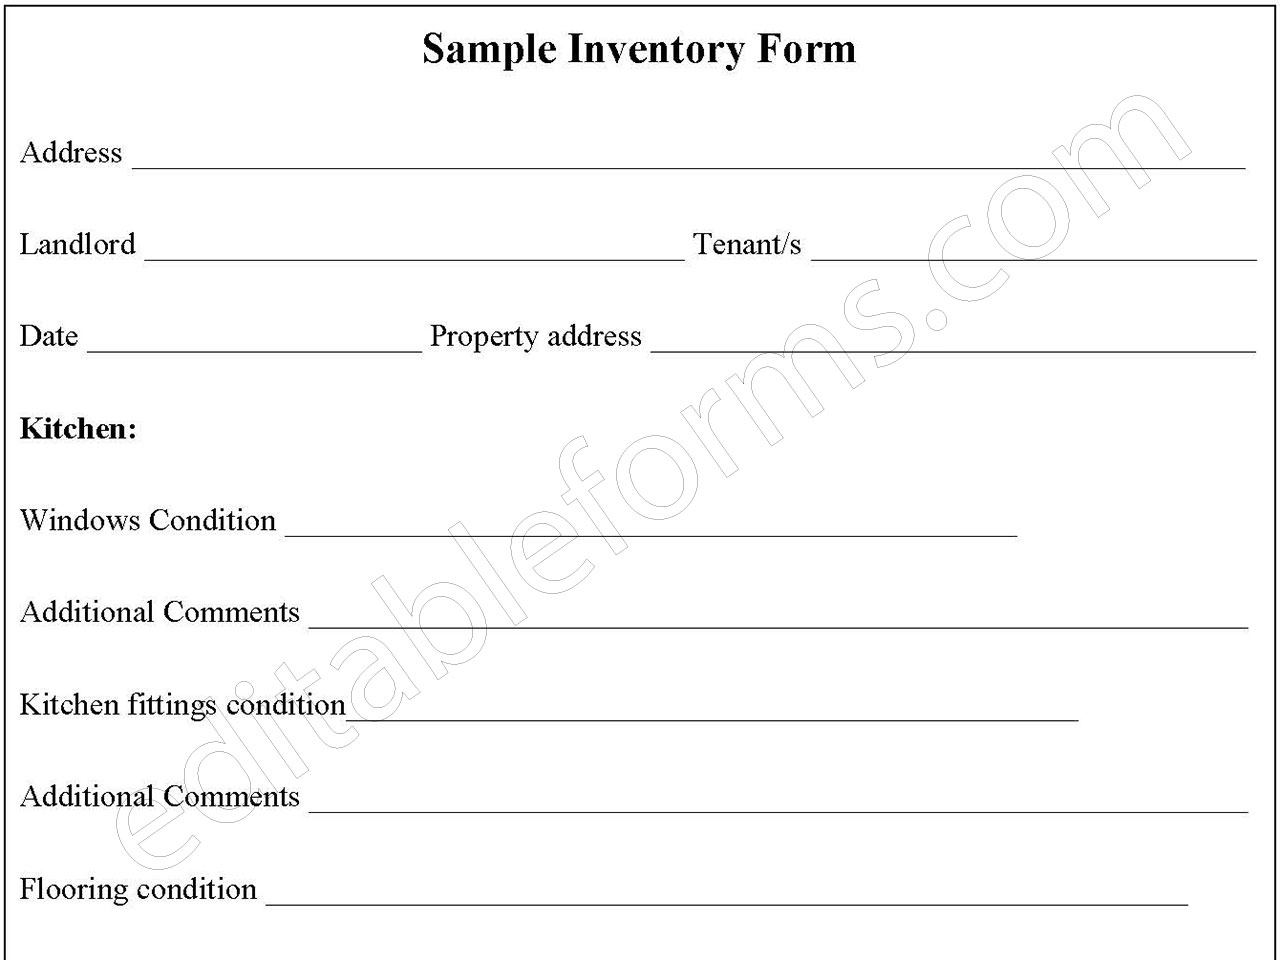 Sample Inventory Form